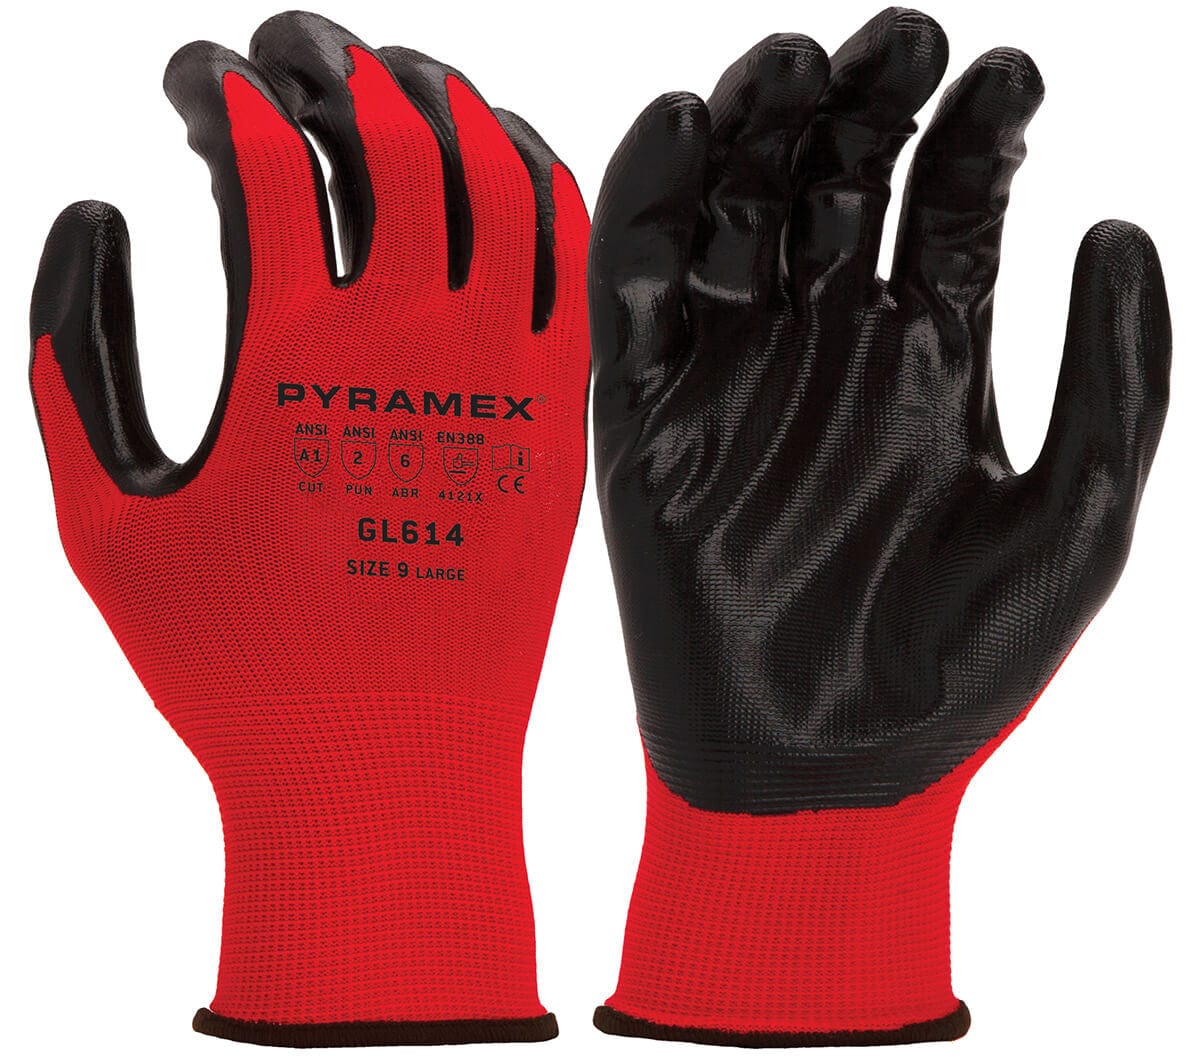 Work Gloves & Hand Protection - Safety Glasses USA